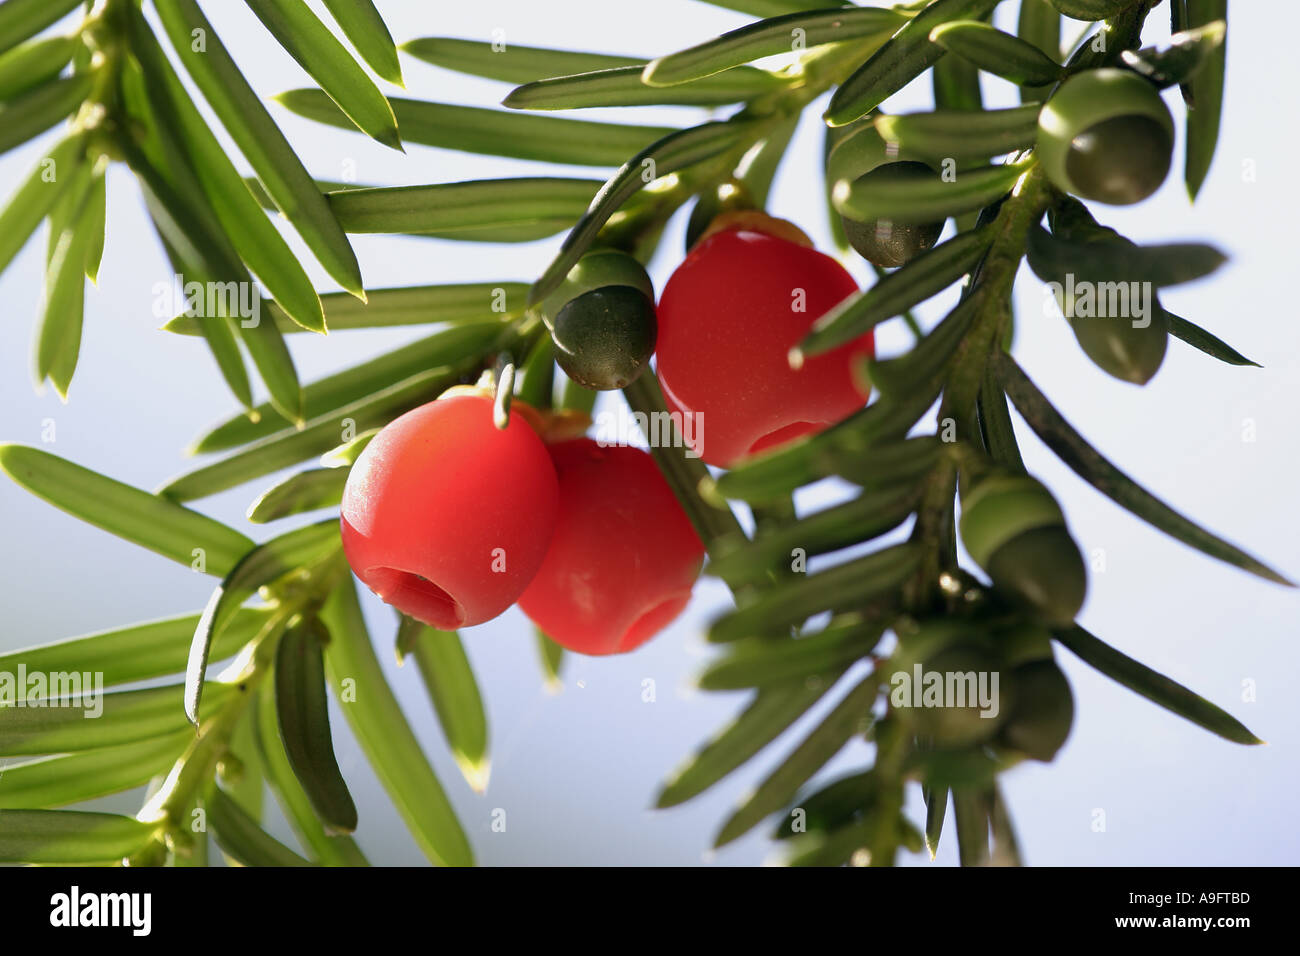 common yew (Taxus baccata), ripe seeds with red seed coat (aril) Stock Photo